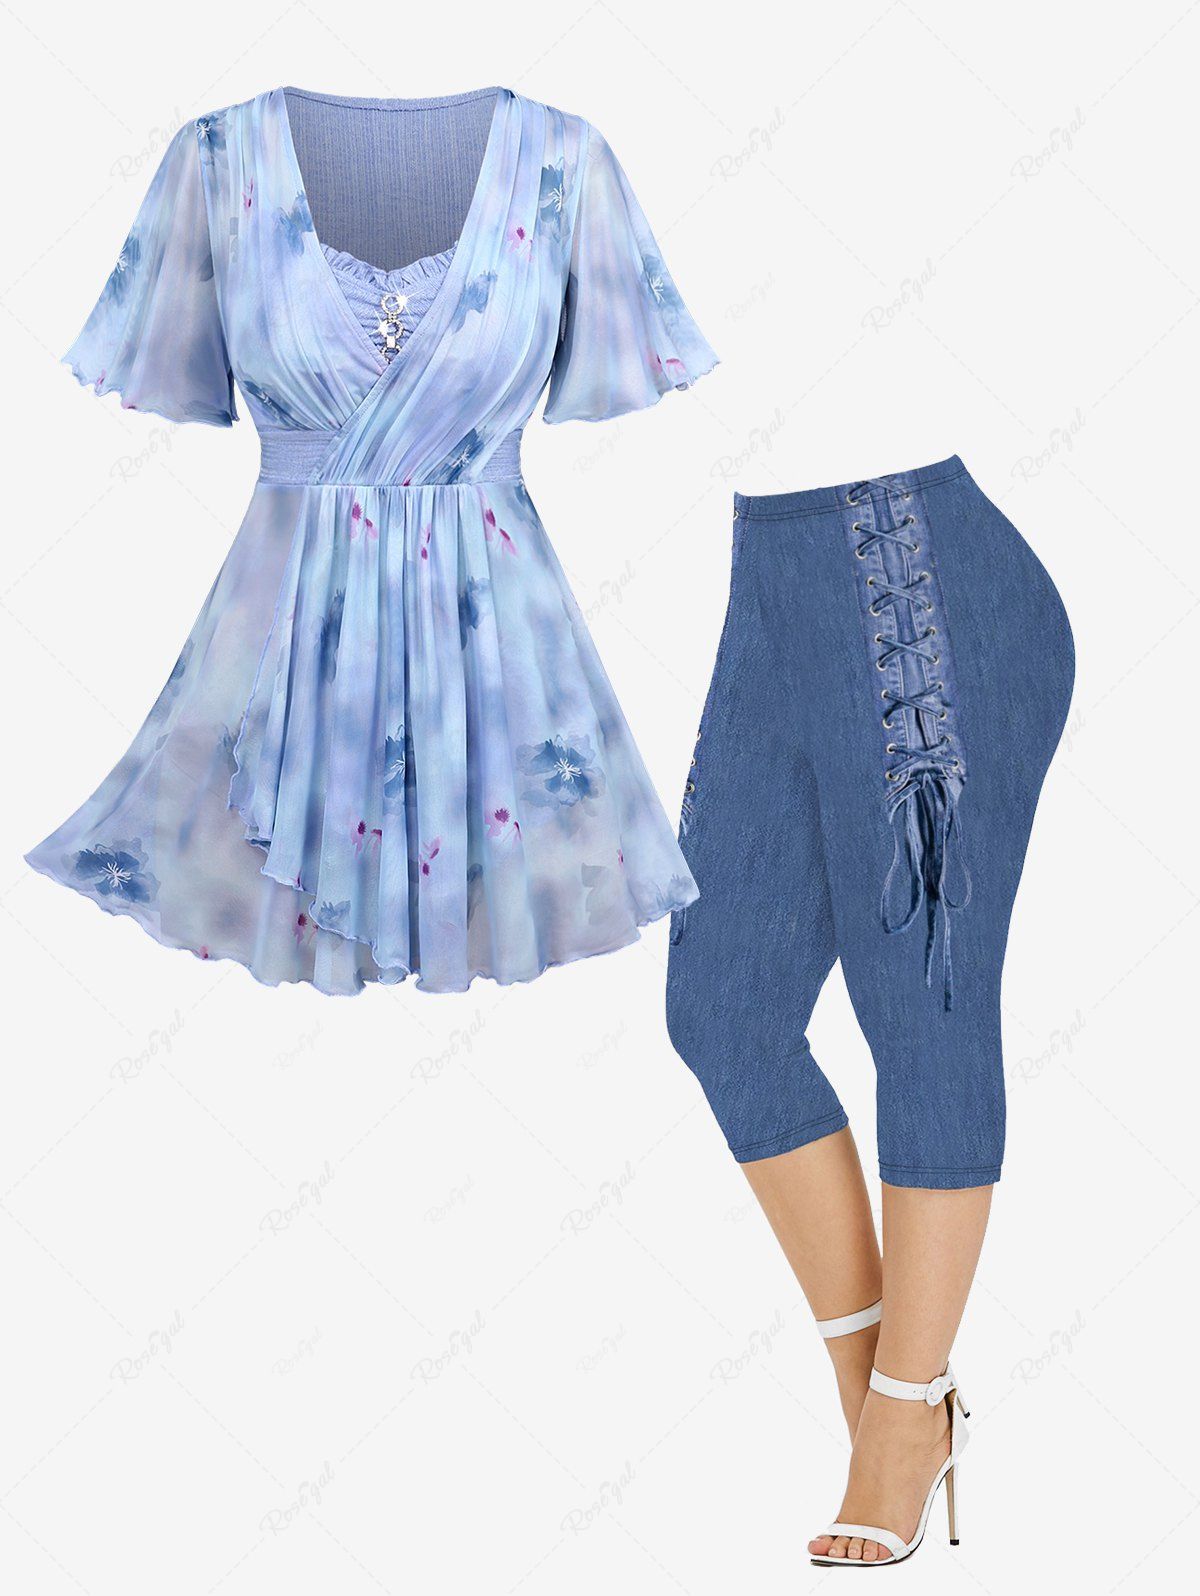 Chic Flowers Watercolor Painting Printed Surplice Chain Panel Ruched Ruffles Tulip Hem Top and Capri Leggings Plus Size Outfit  